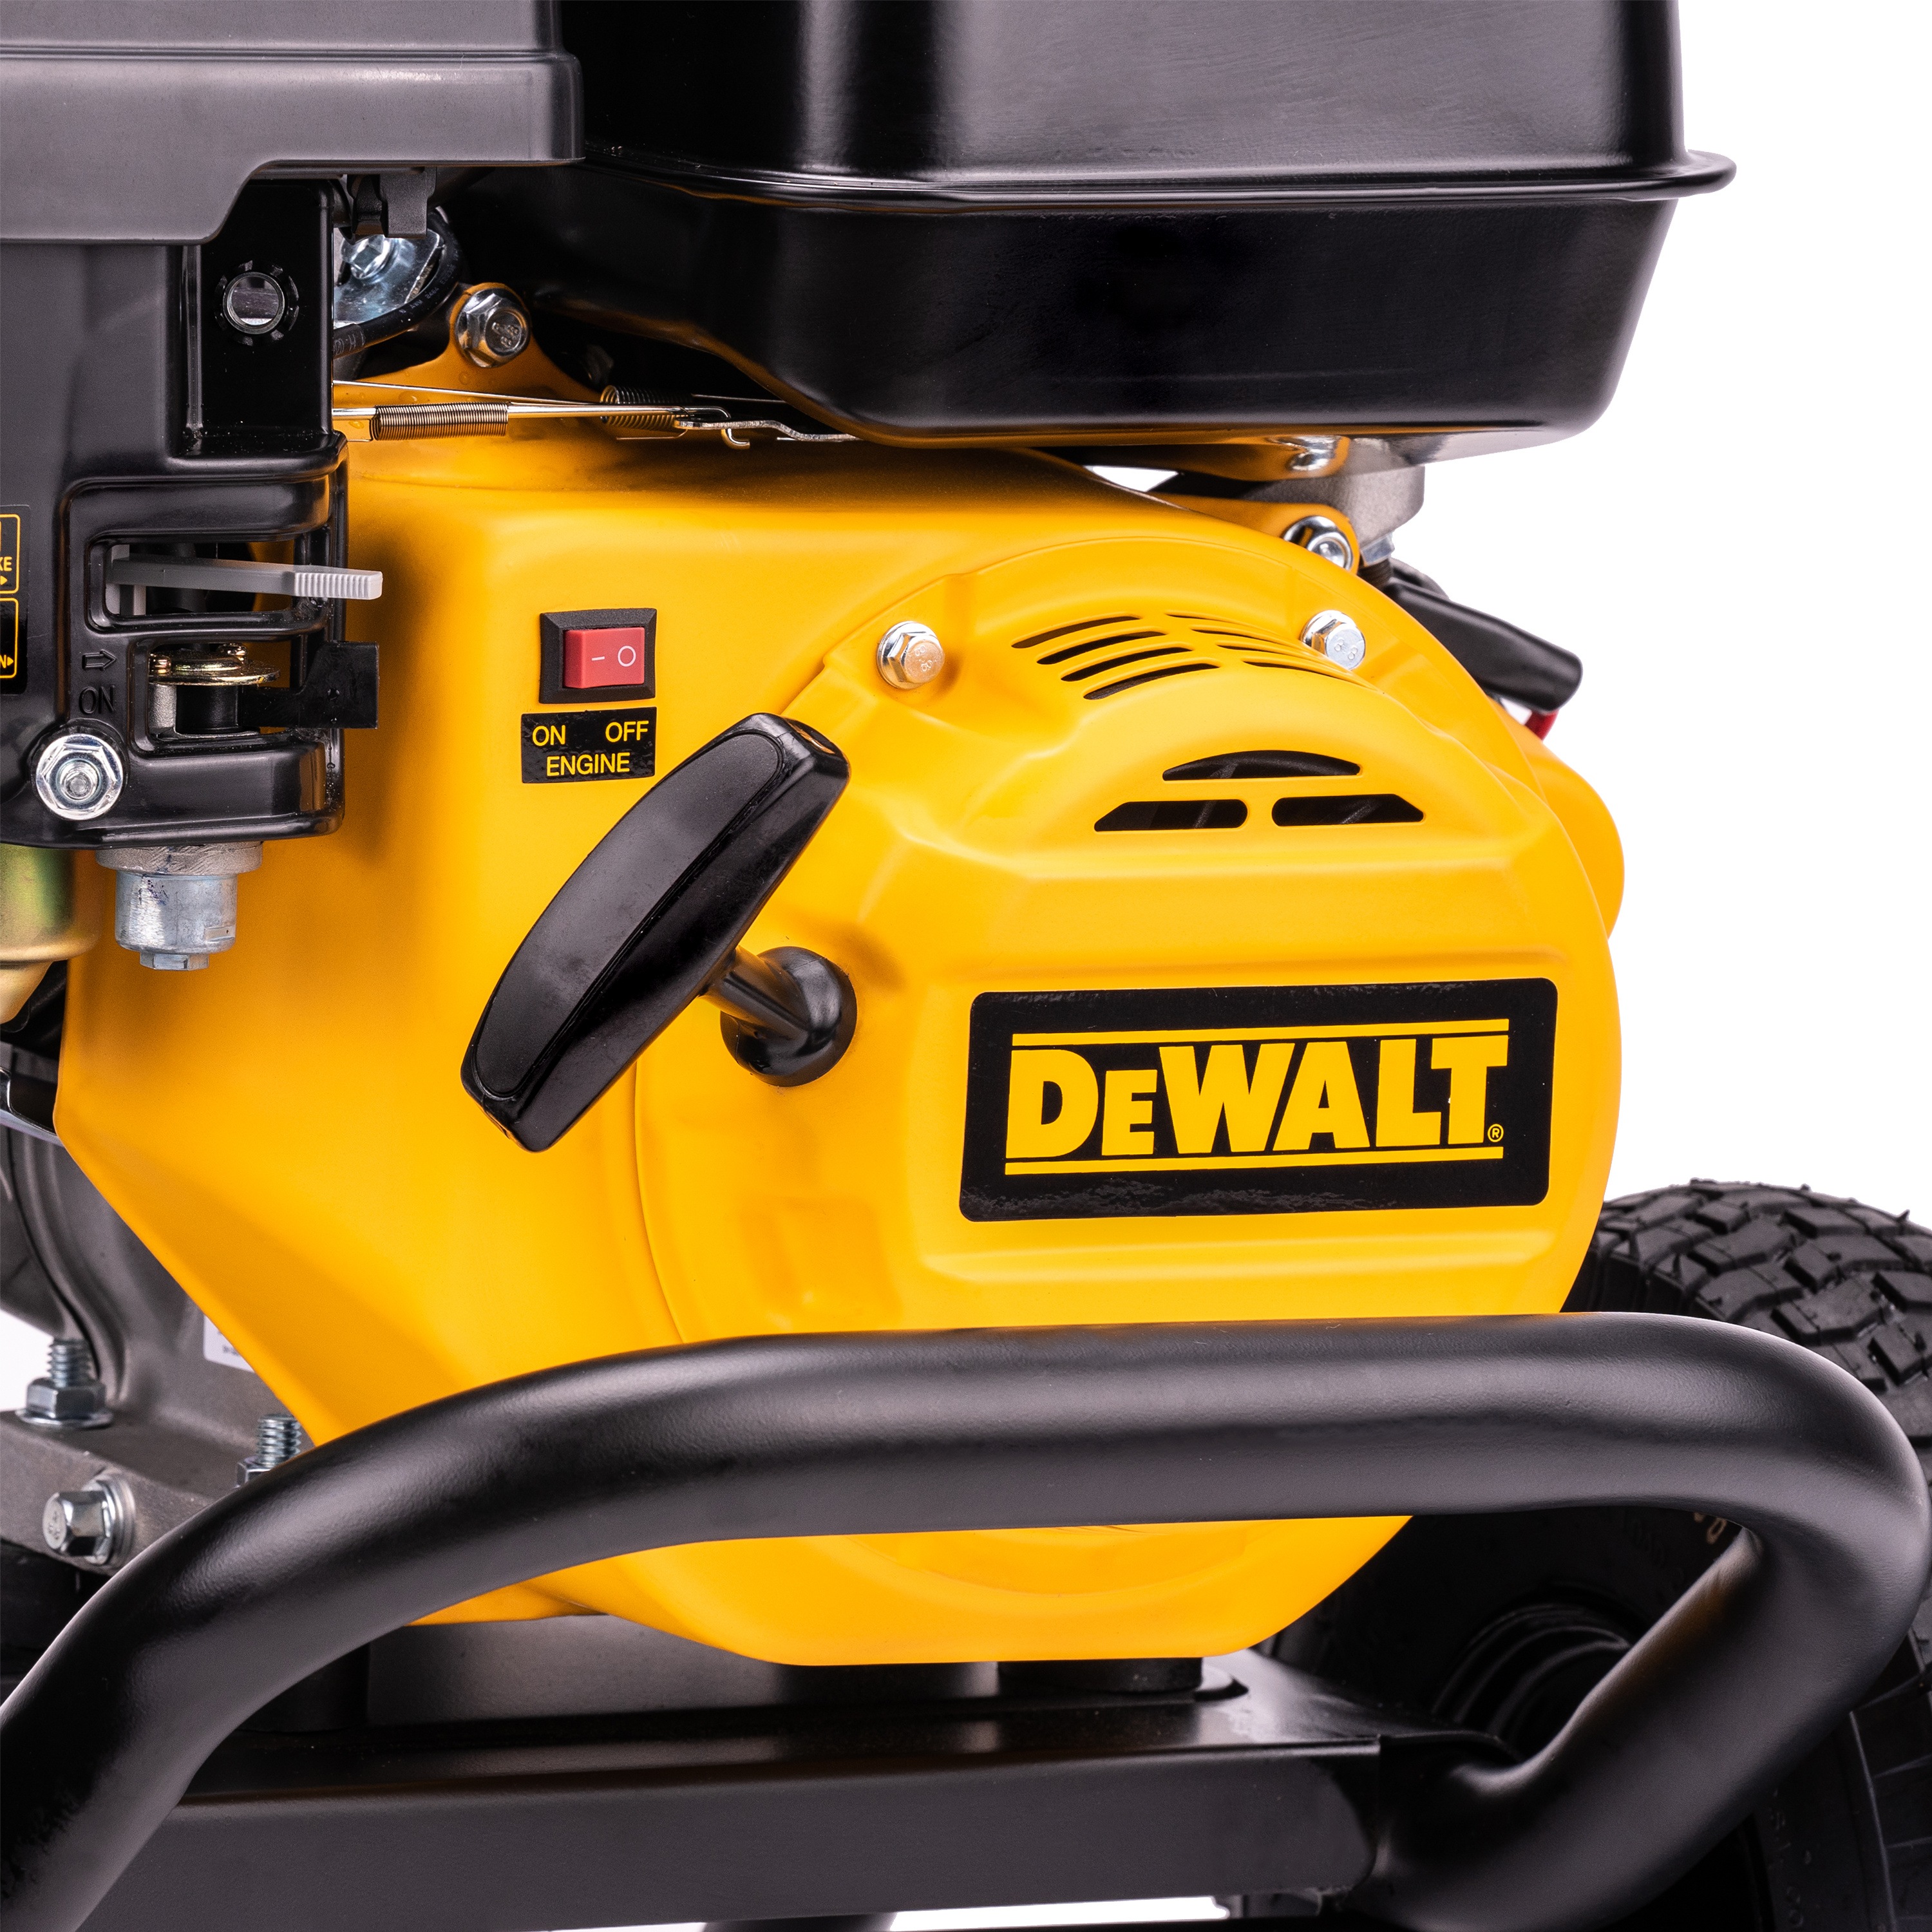 Powerful engine with low oil shutdown feature of PressuReady 3400 PSI at 2.5 GPM Powered Cold Water Gas Pressure Washer.